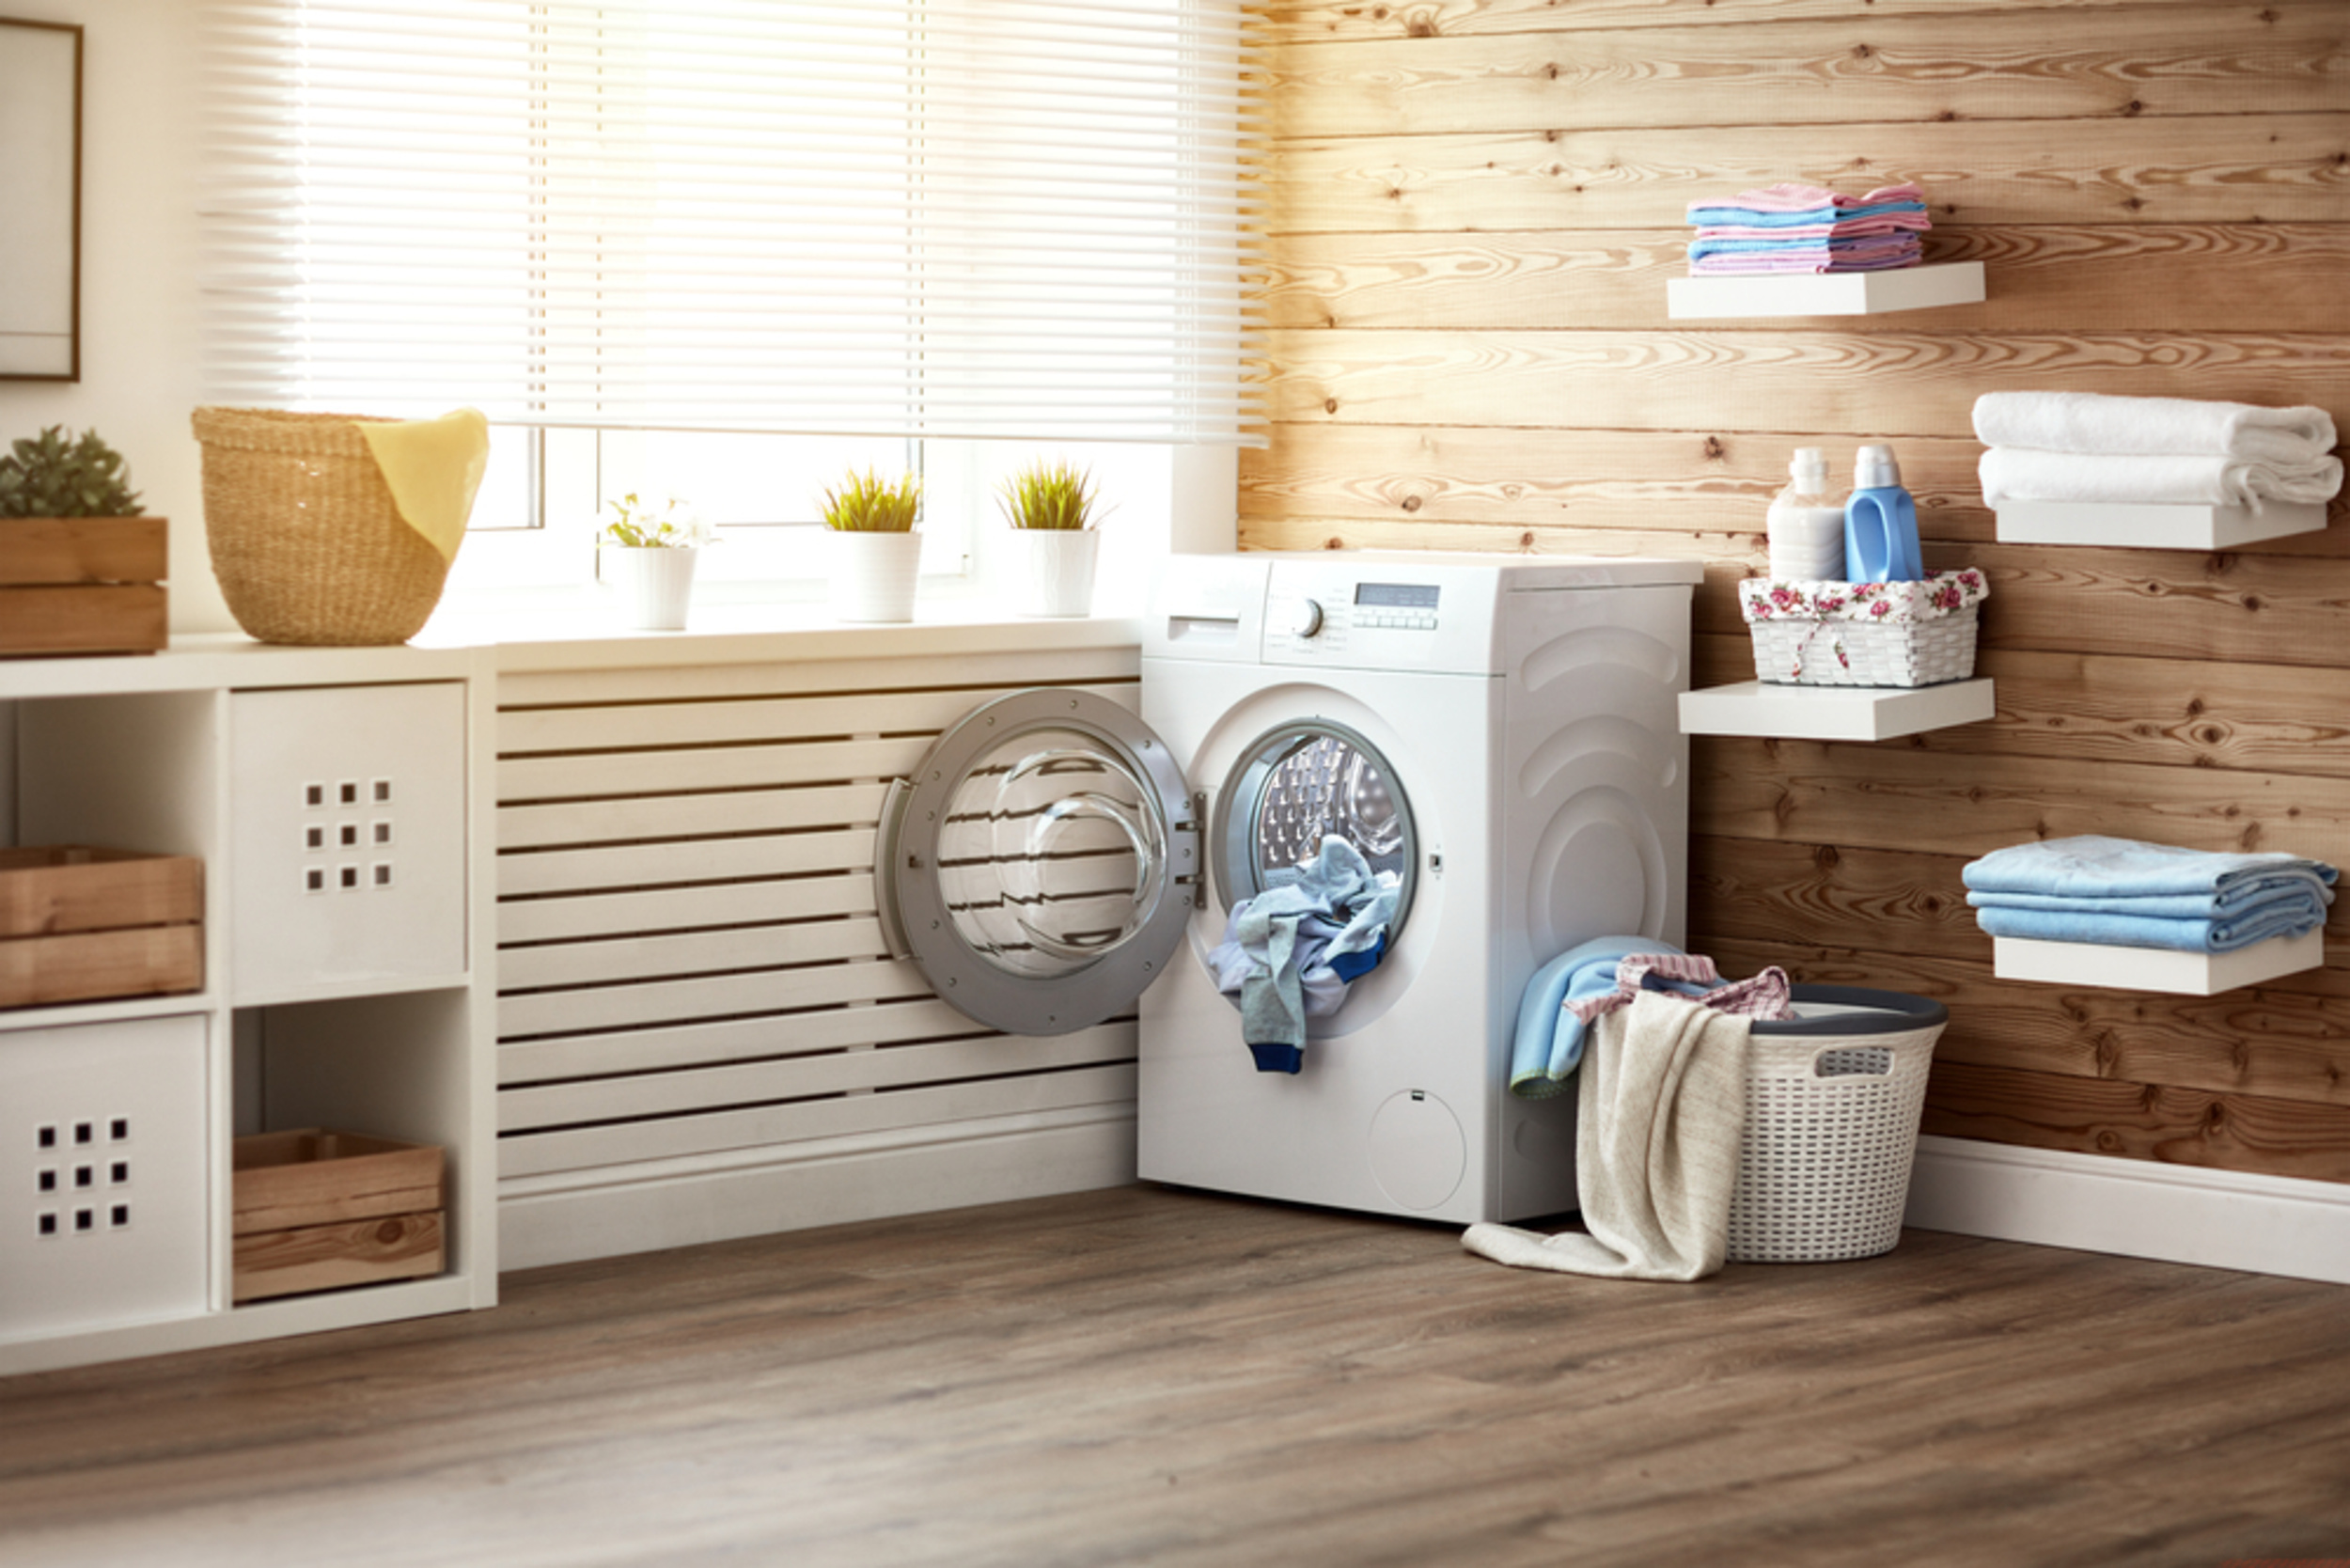 <p>Washing machines, dryers, and other large appliances can give off substantial amounts of heat. Do your laundry late at night, or consider taking advantage of the warm weather and drying some of your clothing outdoors on a clothesline. You'll save energy, keep the house cooler, and your clothes will smell great. </p><p><a href='https://www.msn.com/en-us/community/channel/vid-cj9pqbr0vn9in2b6ddcd8sfgpfq6x6utp44fssrv6mc2gtybw0us'>Did you enjoy this slideshow? Follow us on MSN to see more of our exclusive lifestyle content.</a></p>